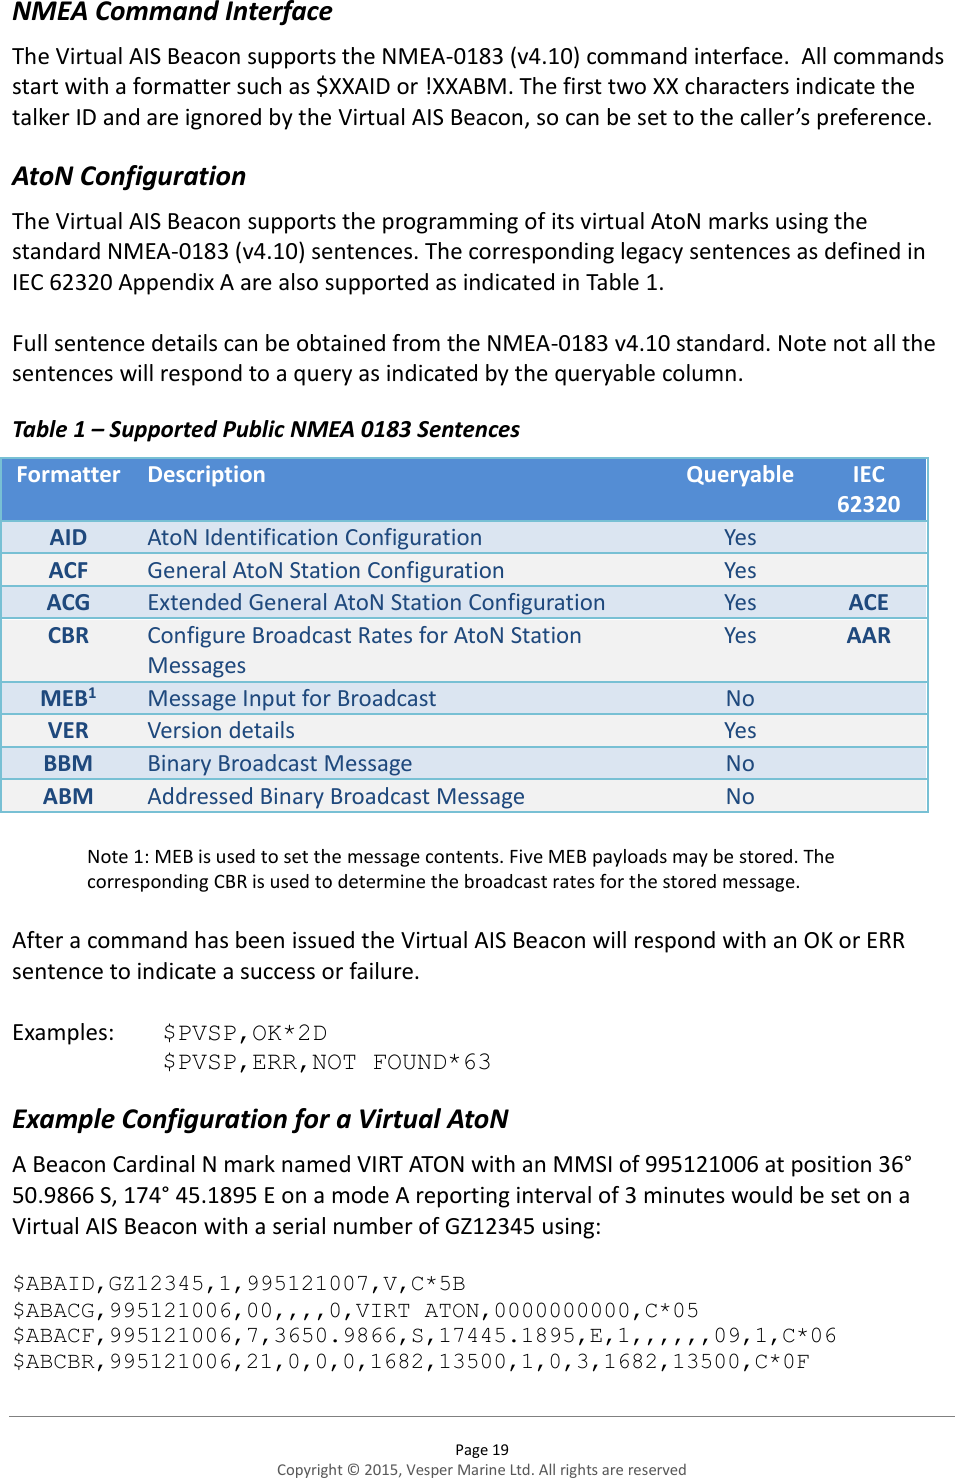  Page 19 Copyright © 2015, Vesper Marine Ltd. All rights are reserved  NMEA Command Interface The Virtual AIS Beacon supports the NMEA-0183 (v4.10) command interface.  All commands start with a formatter such as $XXAID or !XXABM. The first two XX characters indicate the talker ID and are ignored by the Virtual AIS Beacon, so can be set to the caller’s preference.  AtoN Configuration The Virtual AIS Beacon supports the programming of its virtual AtoN marks using the standard NMEA-0183 (v4.10) sentences. The corresponding legacy sentences as defined in IEC 62320 Appendix A are also supported as indicated in Table 1.  Full sentence details can be obtained from the NMEA-0183 v4.10 standard. Note not all the sentences will respond to a query as indicated by the queryable column. Table 1 – Supported Public NMEA 0183 Sentences Formatter Description  Queryable IEC 62320 AID AtoN Identification Configuration  Yes  ACF General AtoN Station Configuration Yes  ACG Extended General AtoN Station Configuration  Yes ACE CBR Configure Broadcast Rates for AtoN Station Messages Yes AAR MEB1 Message Input for Broadcast  No  VER Version details  Yes  BBM Binary Broadcast Message  No  ABM Addressed Binary Broadcast Message No   Note 1: MEB is used to set the message contents. Five MEB payloads may be stored. The corresponding CBR is used to determine the broadcast rates for the stored message.  After a command has been issued the Virtual AIS Beacon will respond with an OK or ERR sentence to indicate a success or failure.   Examples:  $PVSP,OK*2D     $PVSP,ERR,NOT FOUND*63 Example Configuration for a Virtual AtoN A Beacon Cardinal N mark named VIRT ATON with an MMSI of 995121006 at position 36° 50.9866 S, 174° 45.1895 E on a mode A reporting interval of 3 minutes would be set on a Virtual AIS Beacon with a serial number of GZ12345 using:  $ABAID,GZ12345,1,995121007,V,C*5B $ABACG,995121006,00,,,,0,VIRT ATON,0000000000,C*05 $ABACF,995121006,7,3650.9866,S,17445.1895,E,1,,,,,,09,1,C*06 $ABCBR,995121006,21,0,0,0,1682,13500,1,0,3,1682,13500,C*0F 